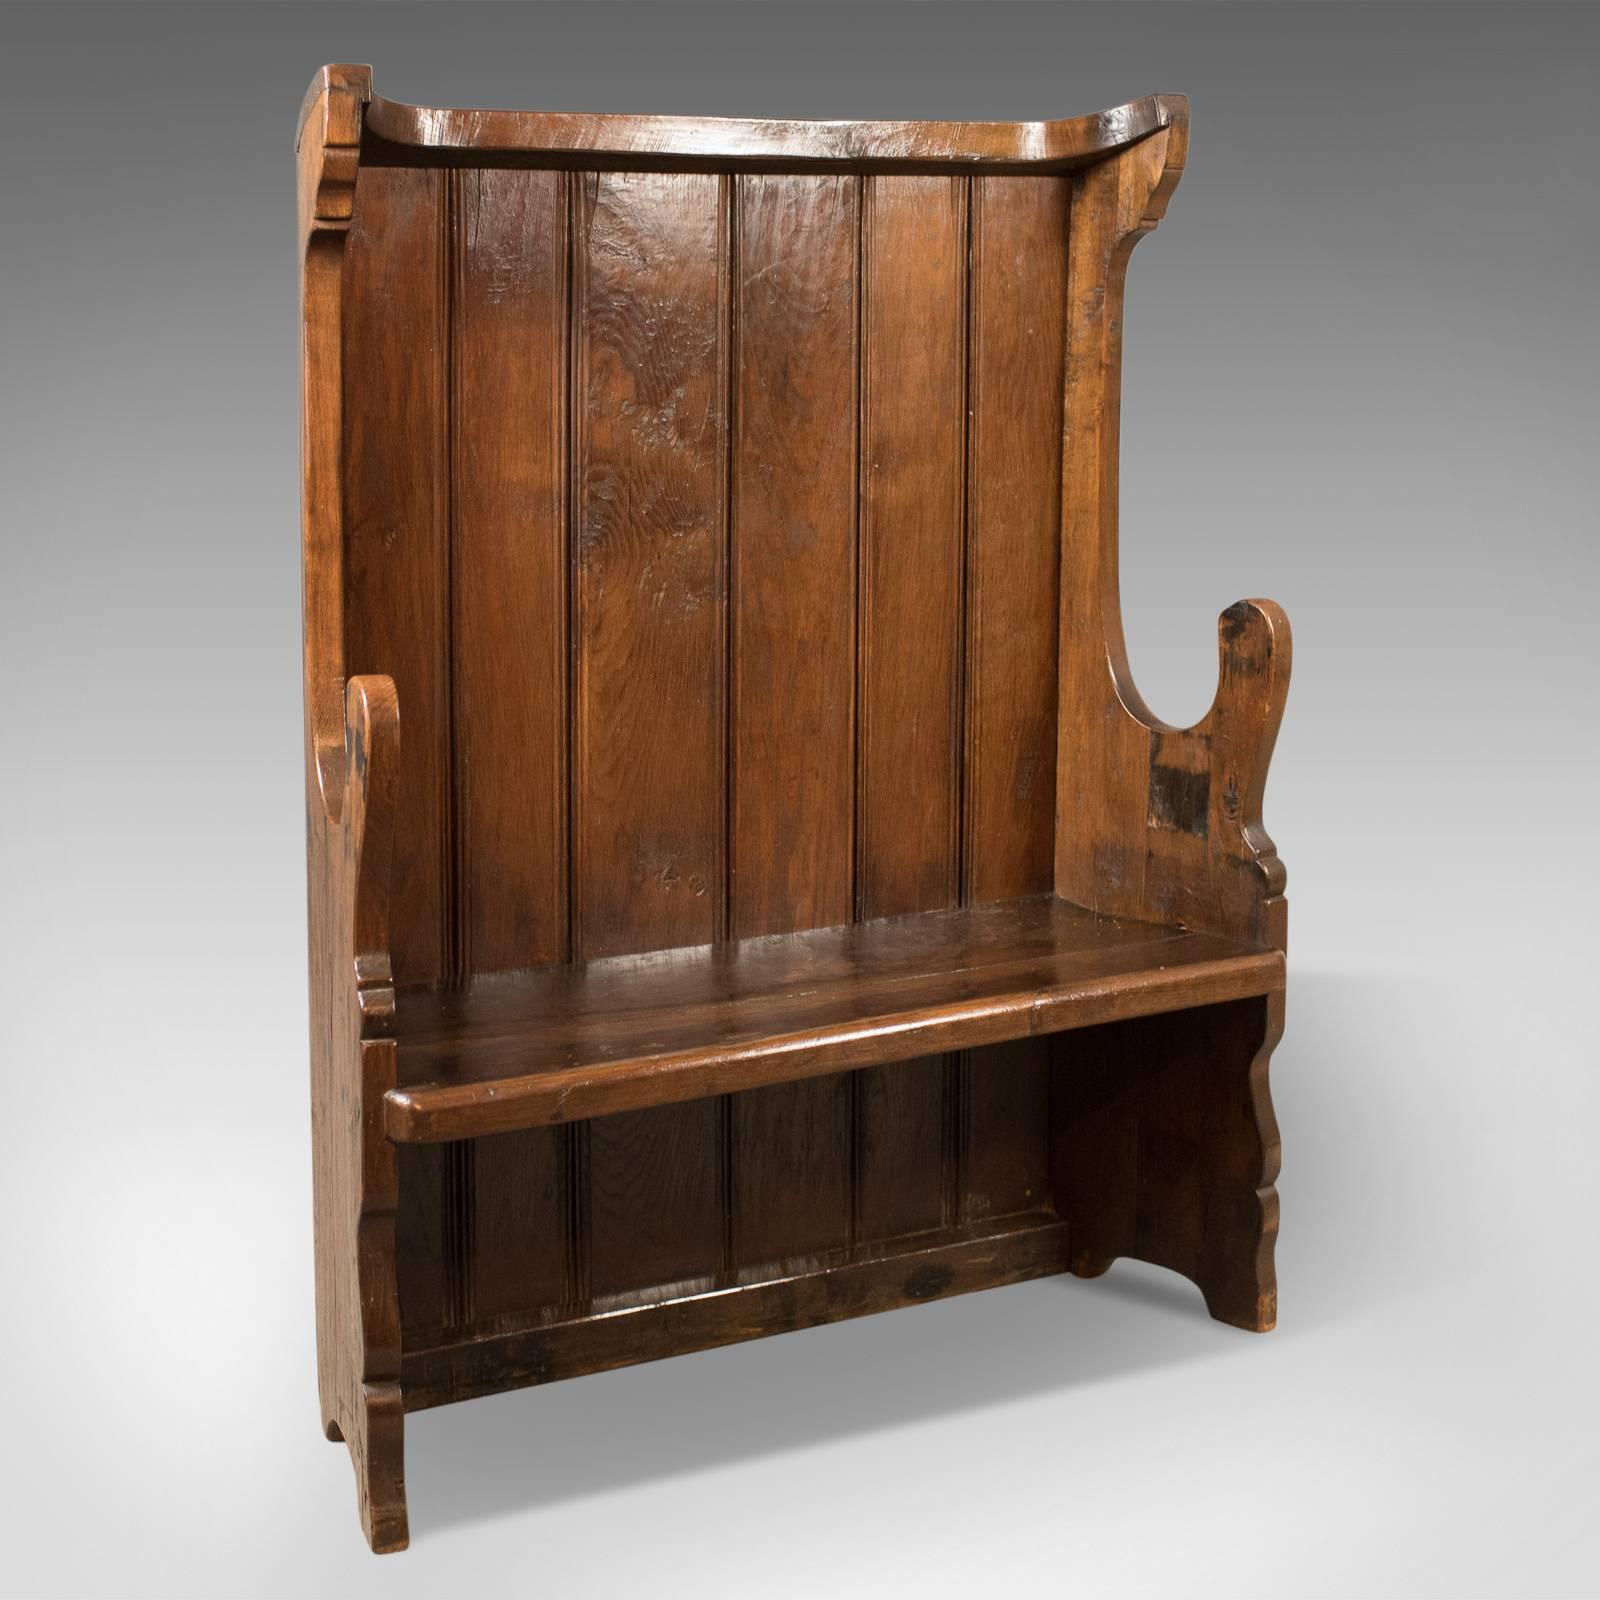 This is an antique settle, a Victorian tavern bench dating to circa 1850 with earlier origins.

Robust and solid in generous stocks of English oak
Attractive waxed finish highlighting good colour and grain interest
Victorian 17th century revival